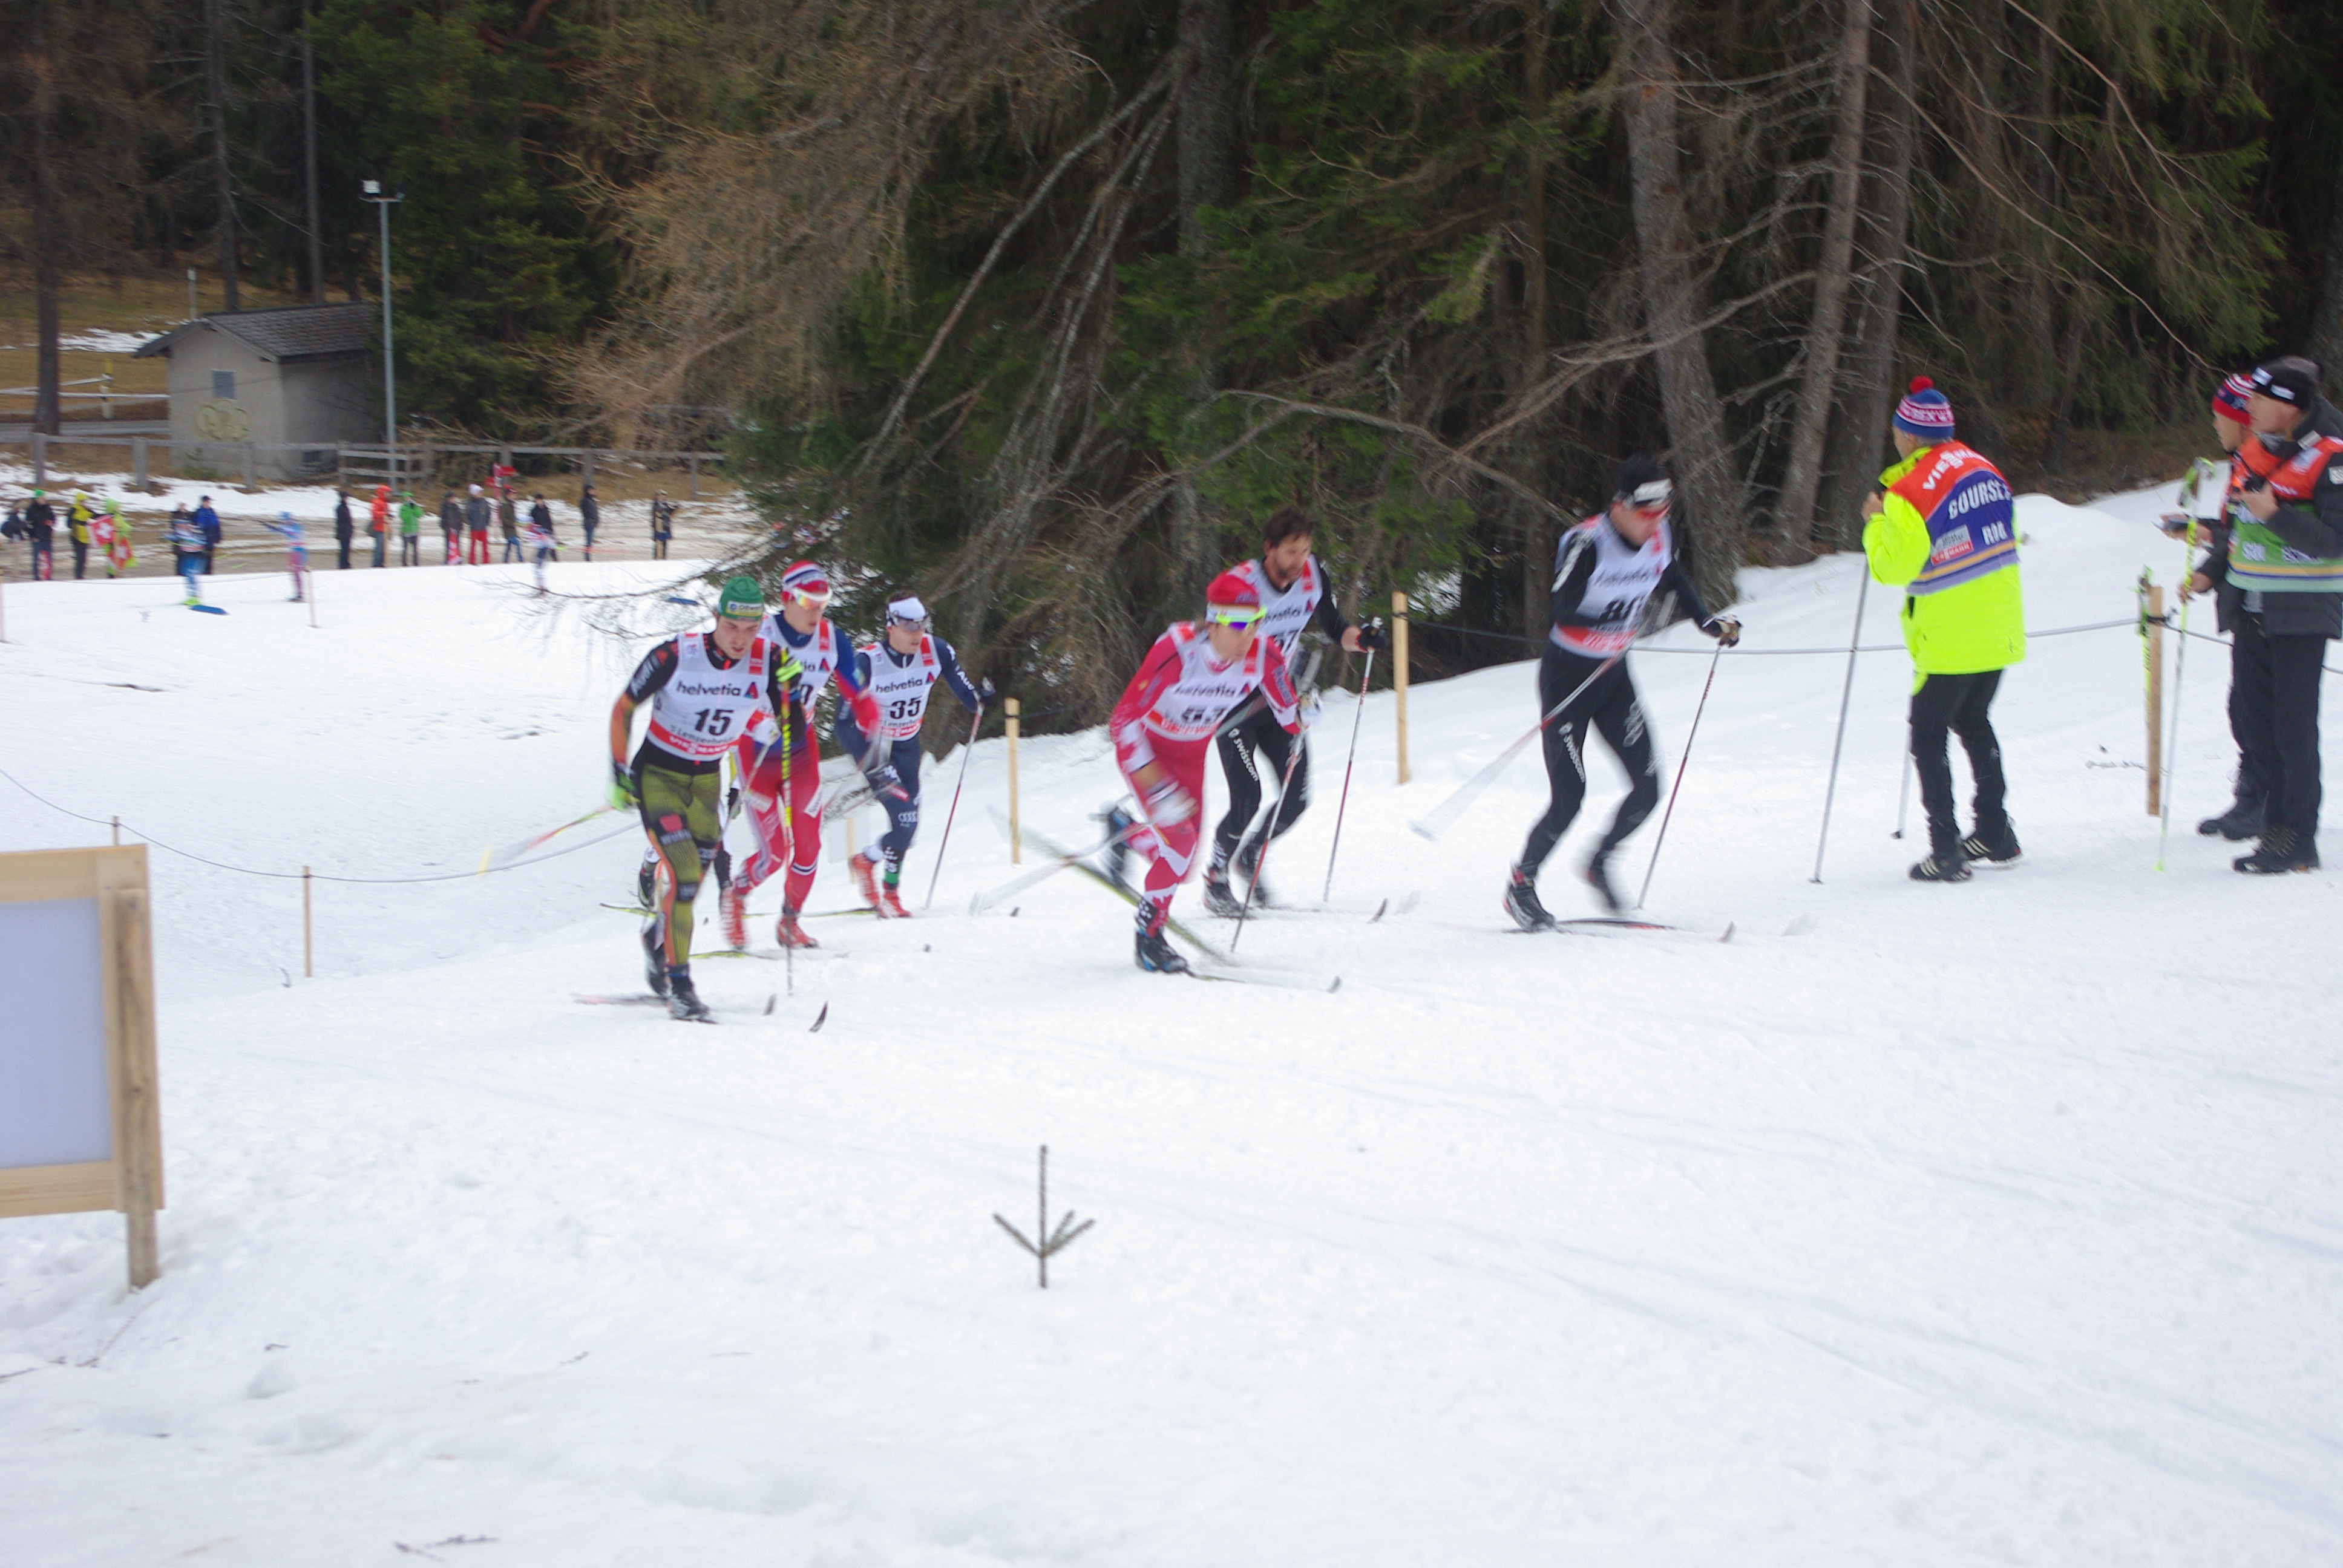 Perfect skis? Devon Kershaw (center in red) slipped on some of the uphills, much like almost every other man in the field. He finished 41st on the day.